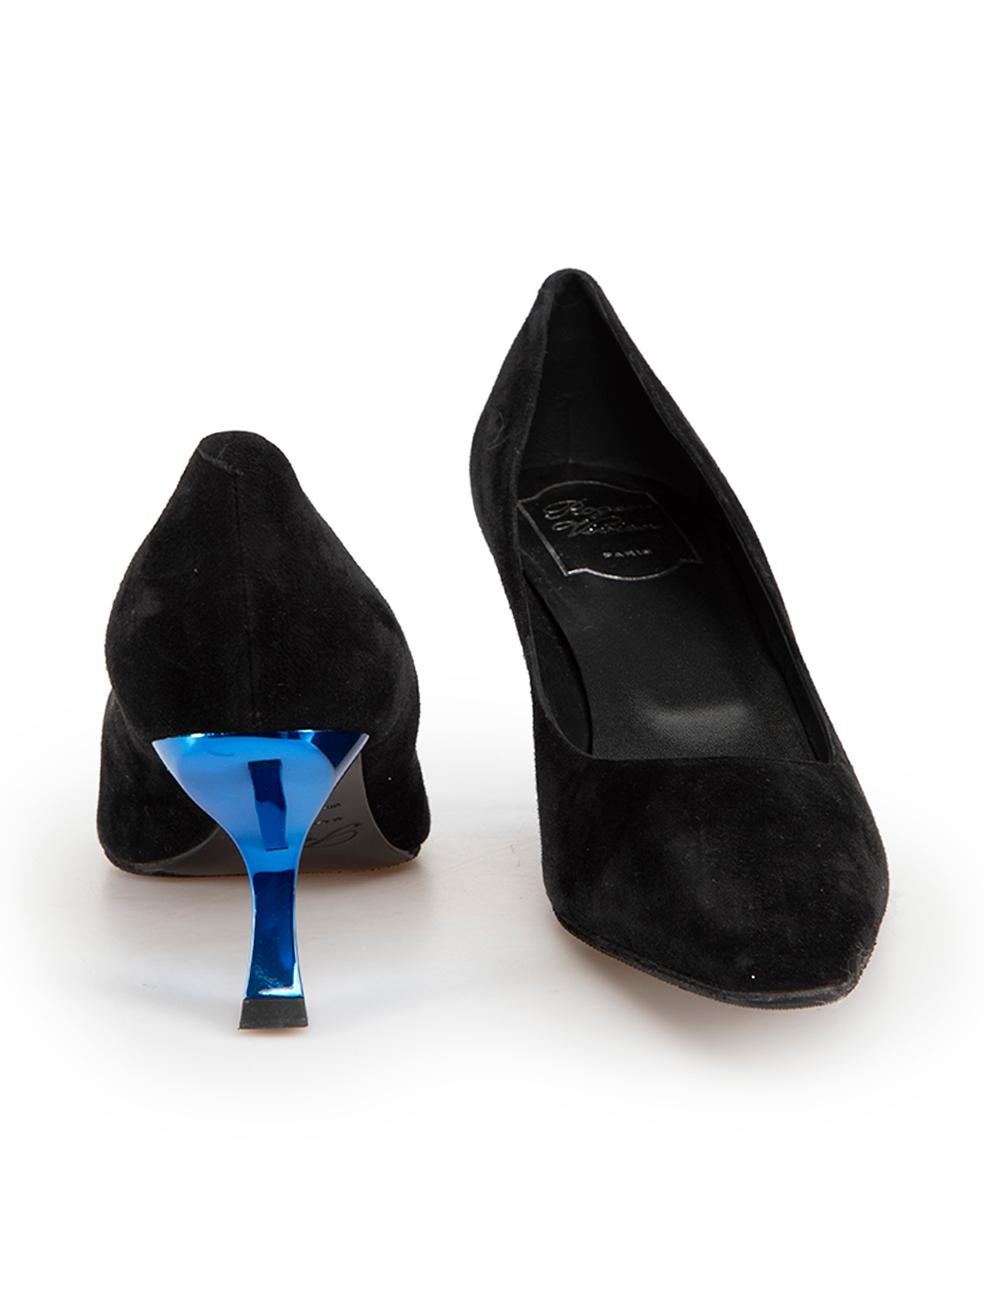 Roger Vivier Black Suede Angled Heel Pumps Size IT 38 In Good Condition For Sale In London, GB